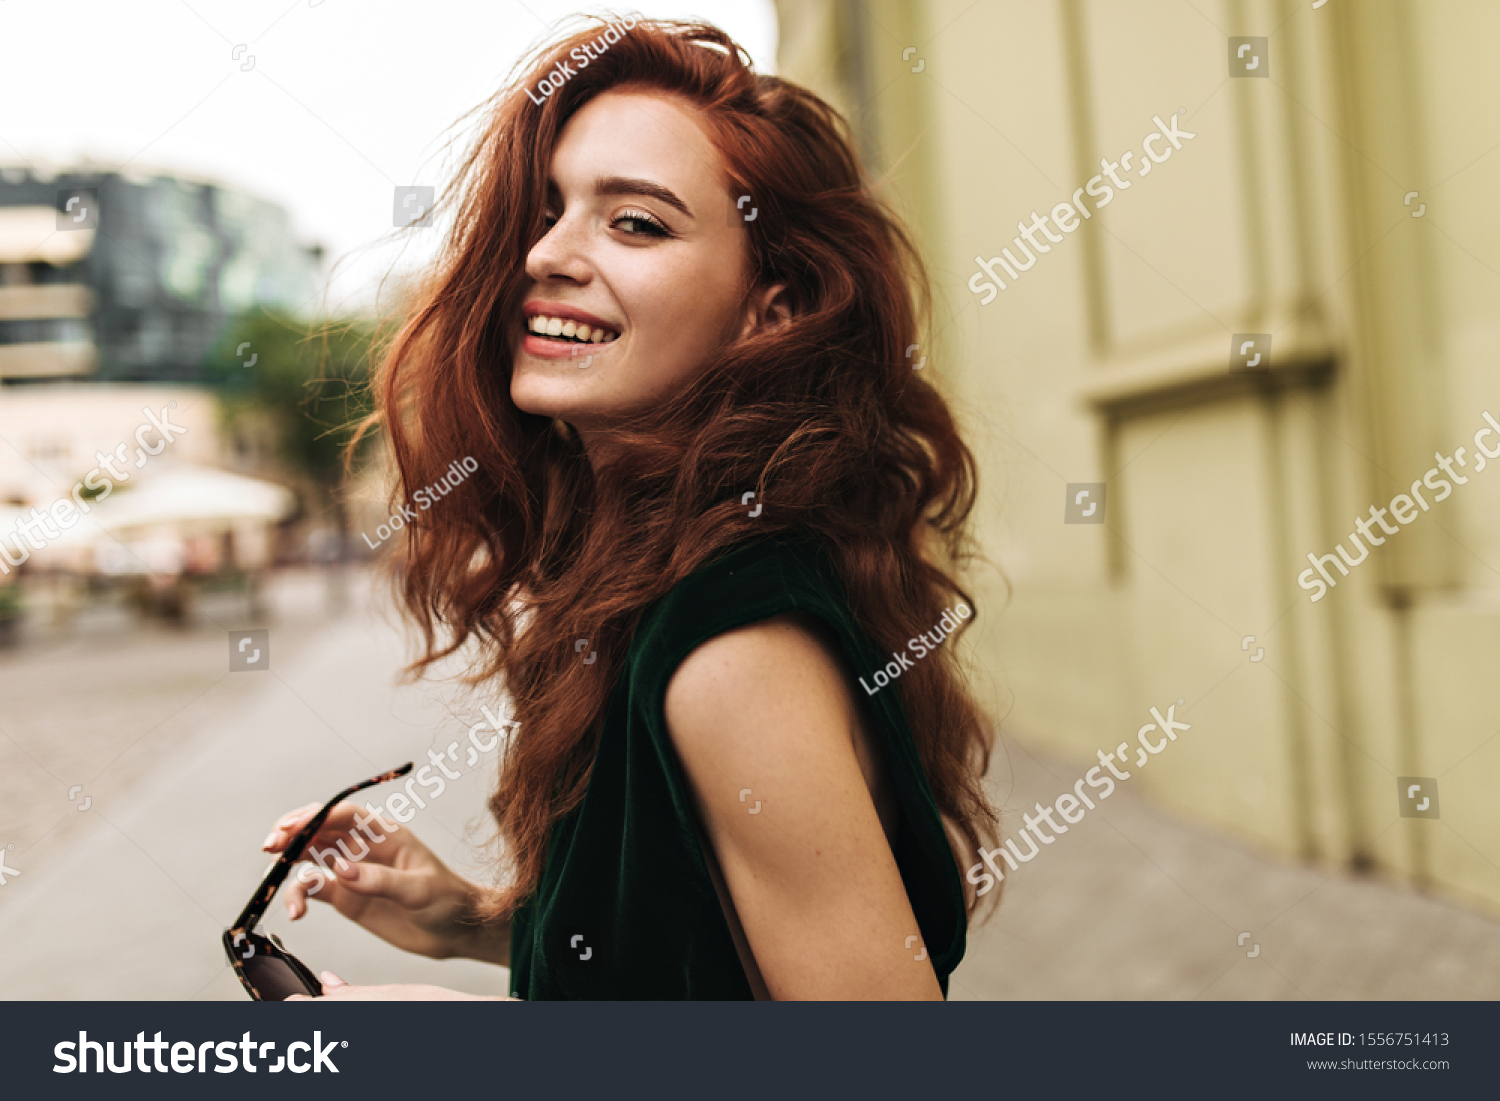 Attractive woman in dark green outfit smiling outside #1556751413